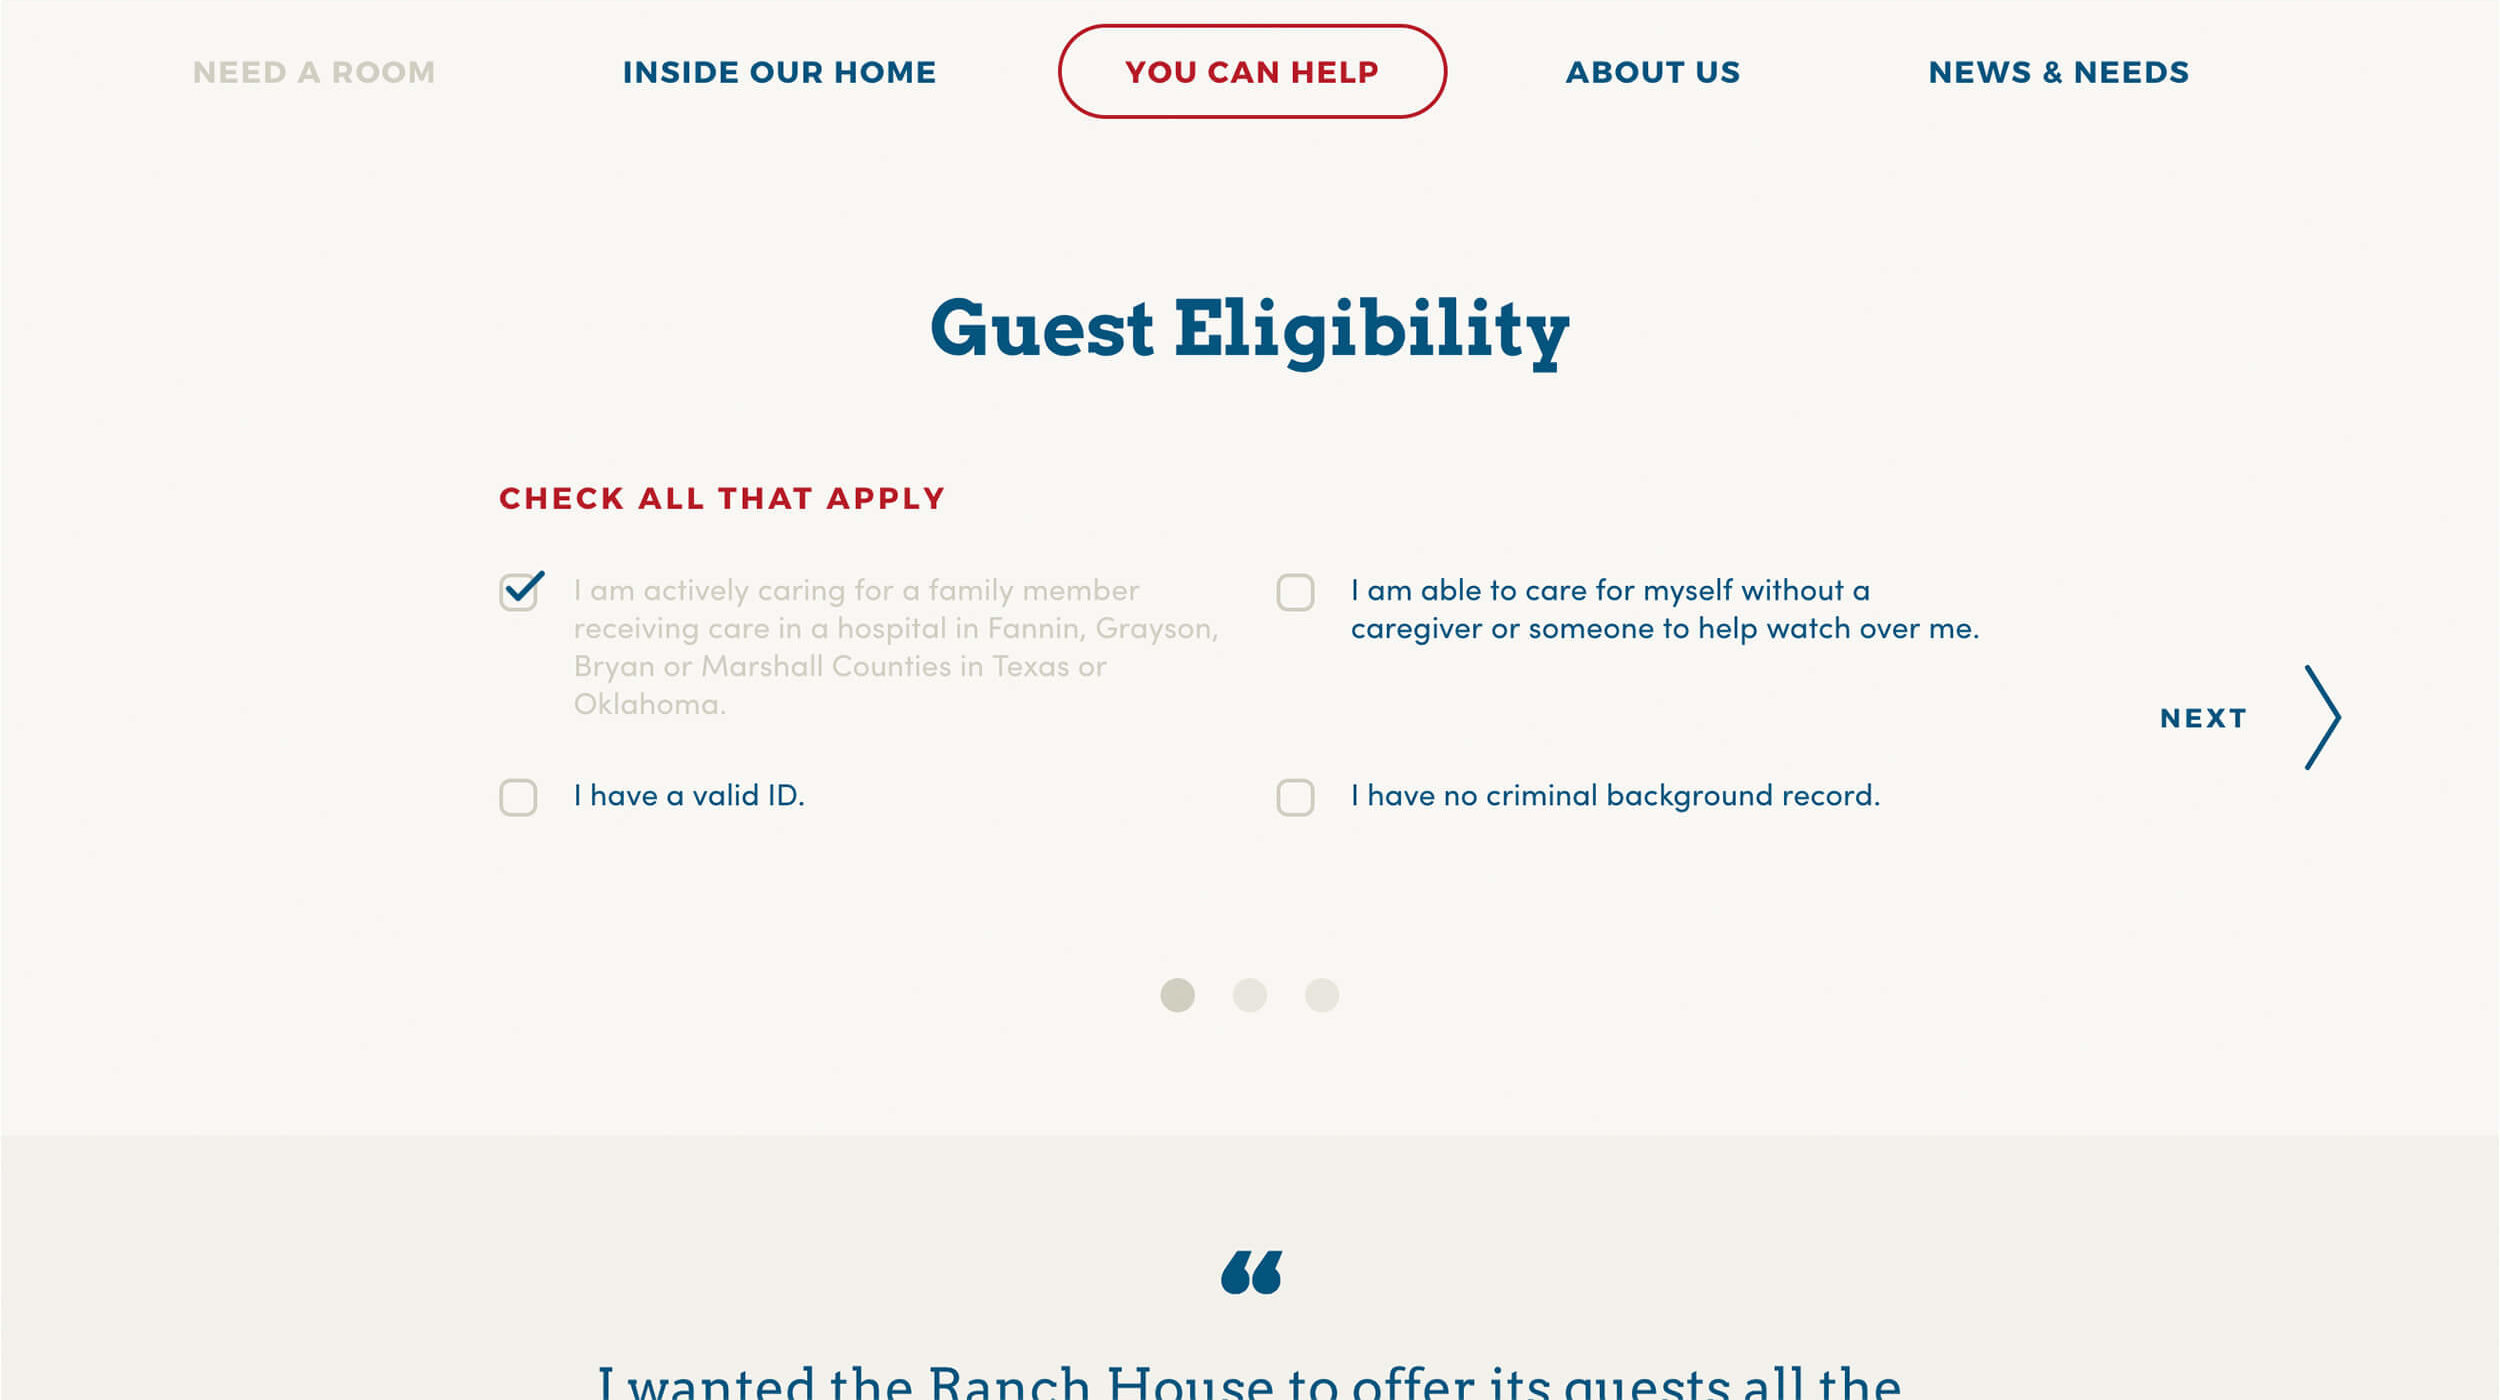 Website design featuring guest eligibility form for Rebas Ranch House, a charity organization in Denison, Texas